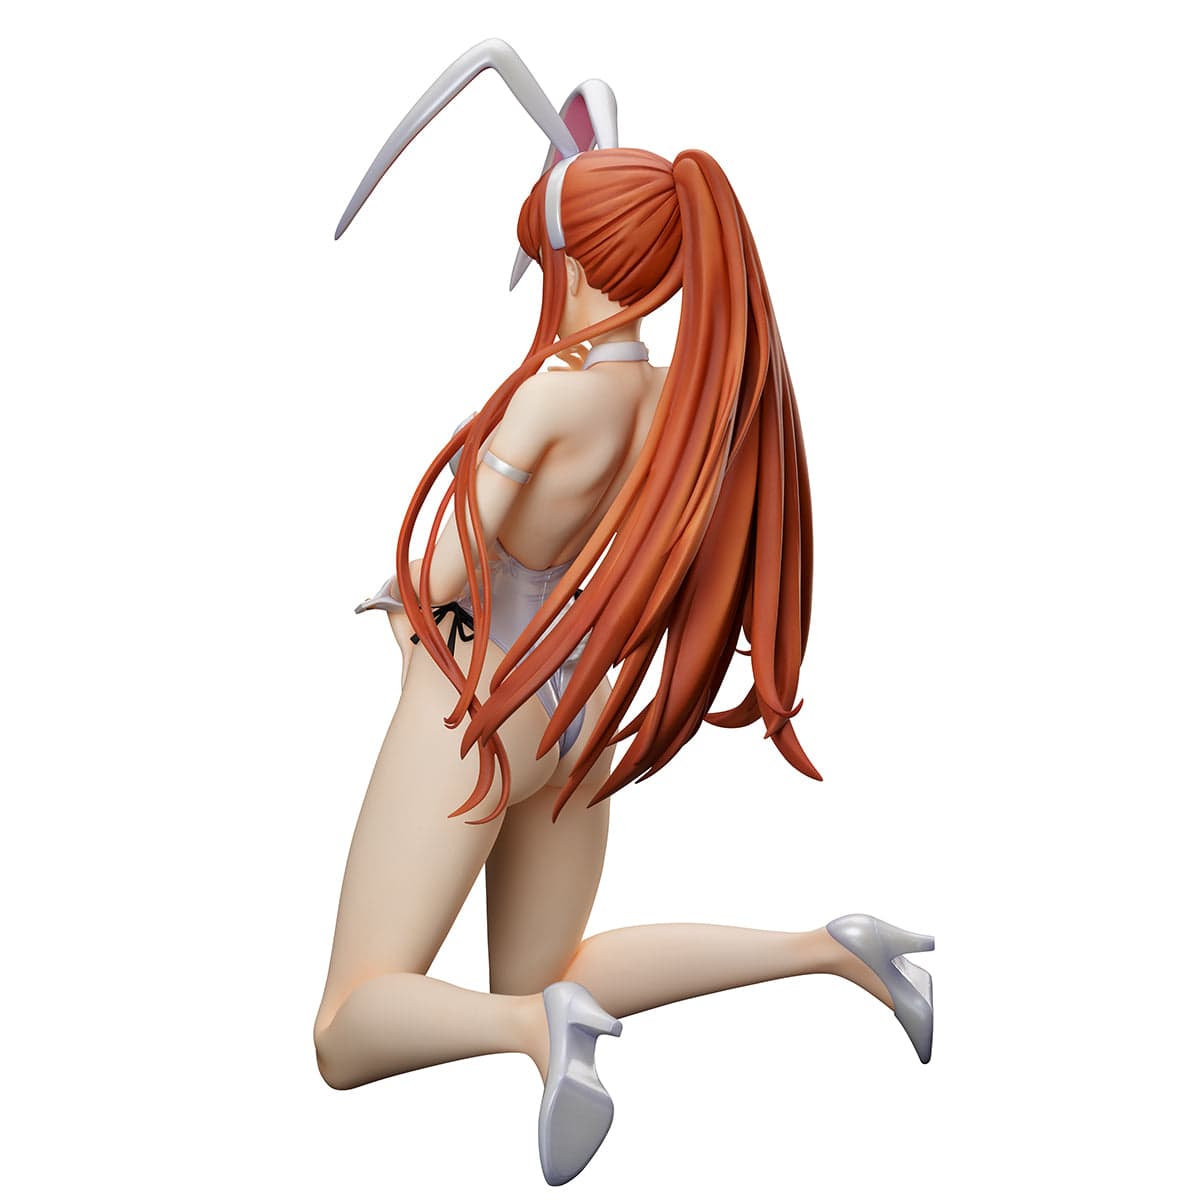 Megahouse B-STYLE CODE GEASS Lelouch of the Rebellion Shirley Fenette Ver. bare legged bunny style 1/4th Scale Figure